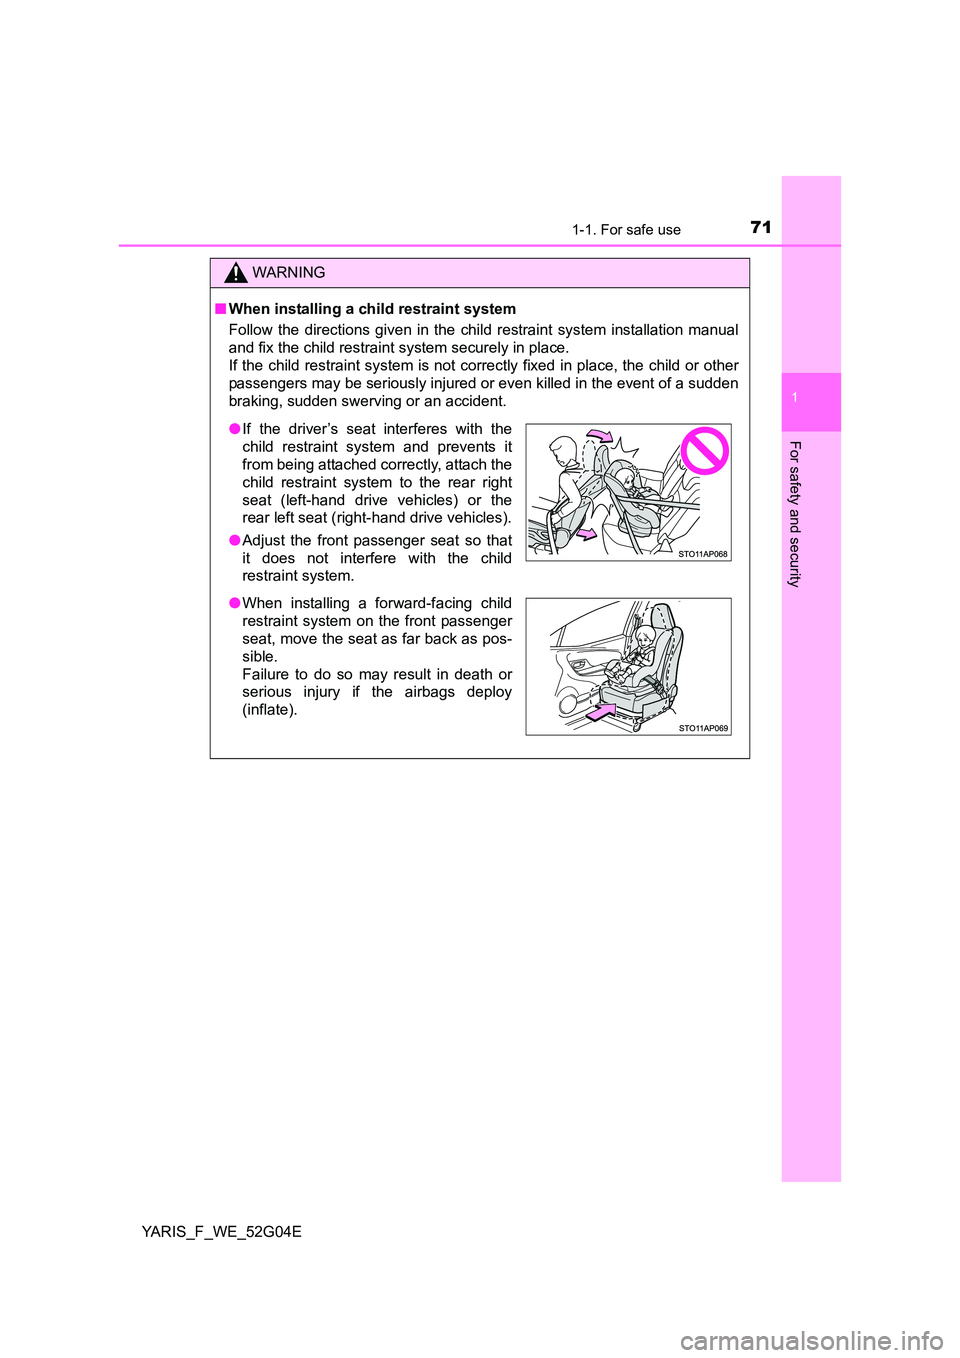 TOYOTA YARIS 2016 Owners Manual 711-1. For safe use
1
For safety and security
YARIS_F_WE_52G04E
WARNING
■When installing a child restraint system
Follow the directions given in the child restraint system installation manual
and fi